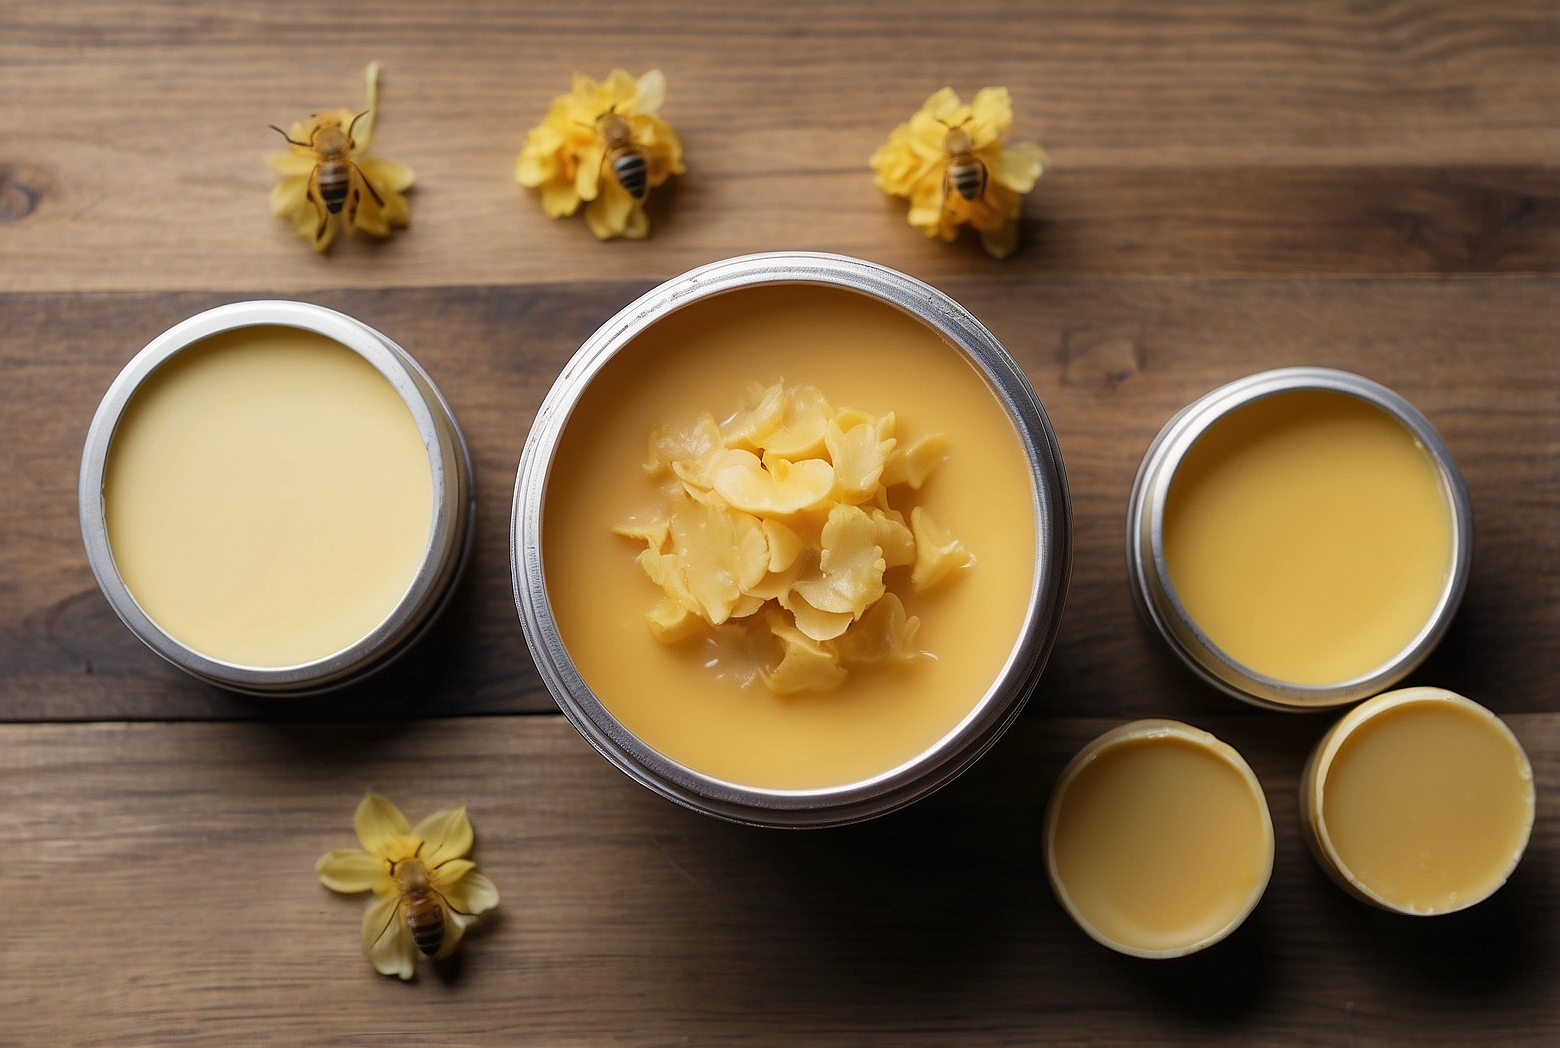 The Proper Ratio of Beeswax to Add to Body Butter